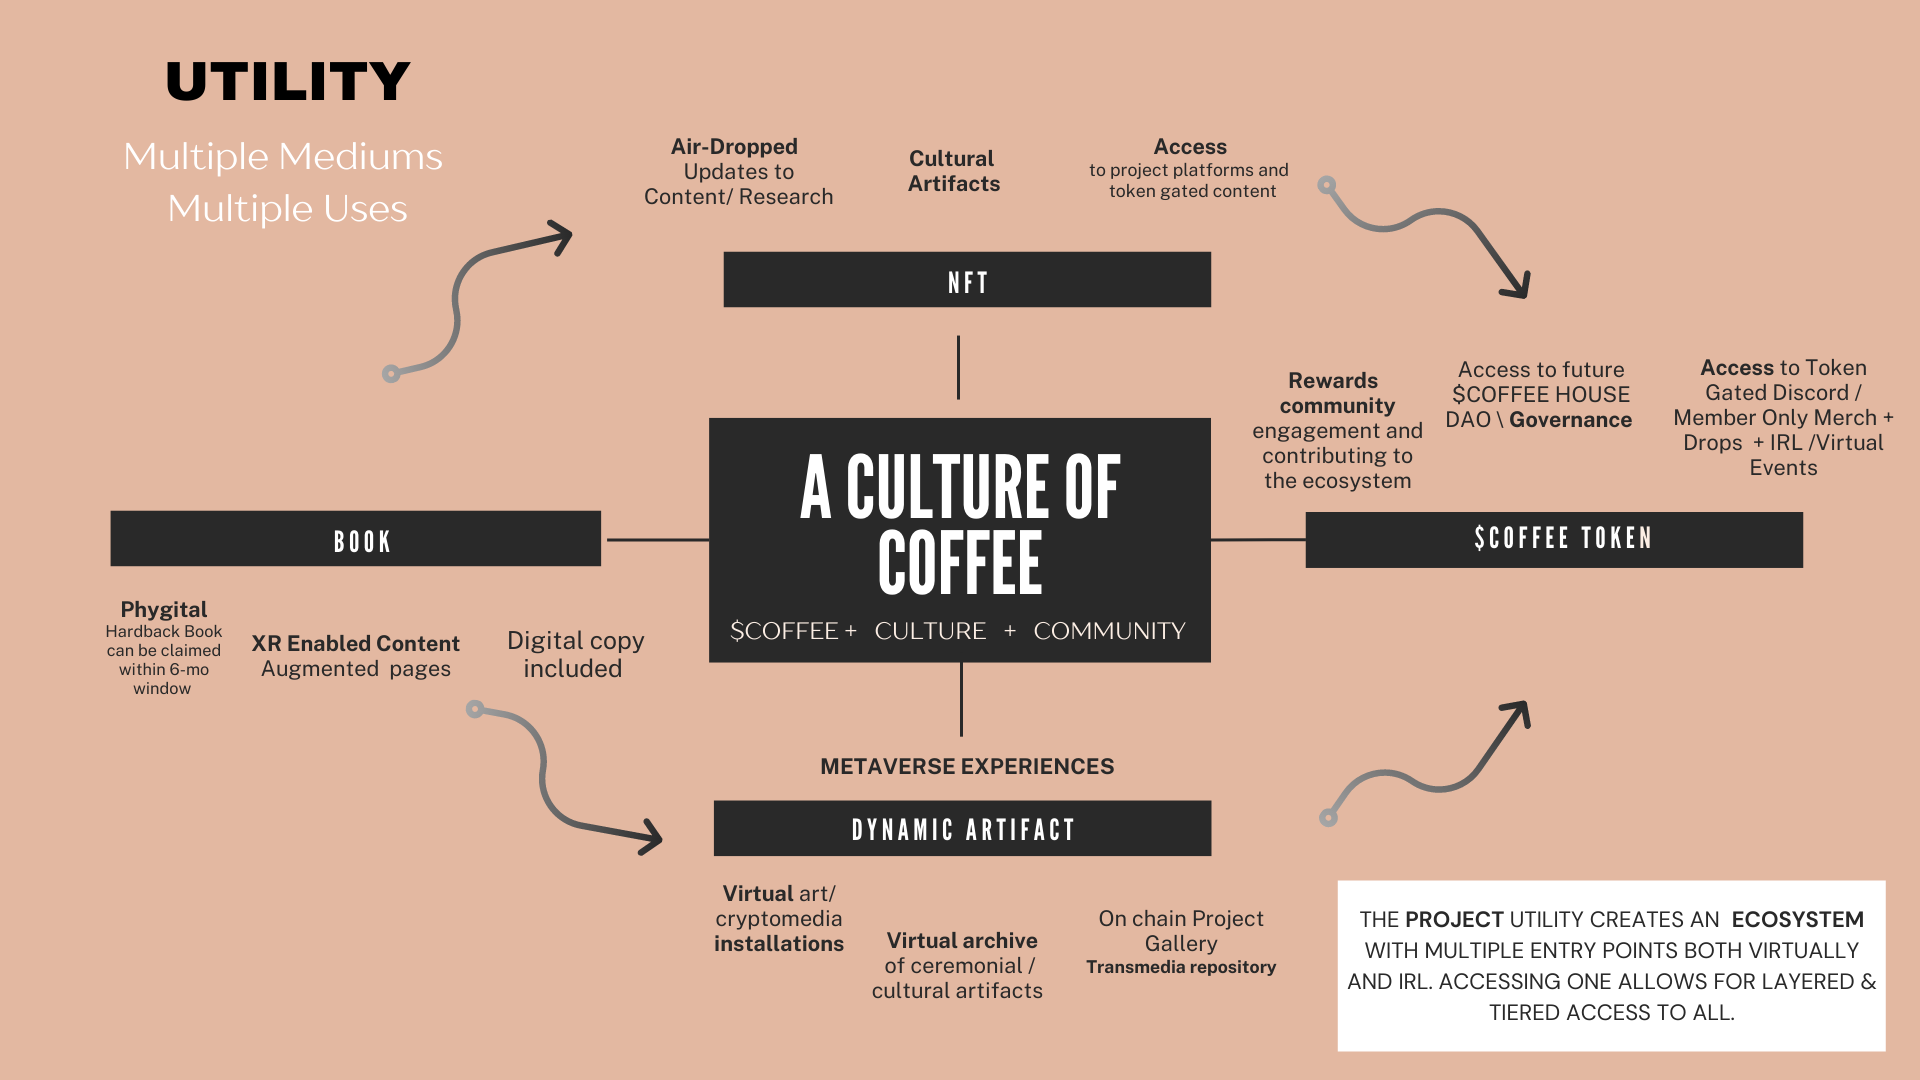 Culture of Coffee project's Transmedia Utility Guide